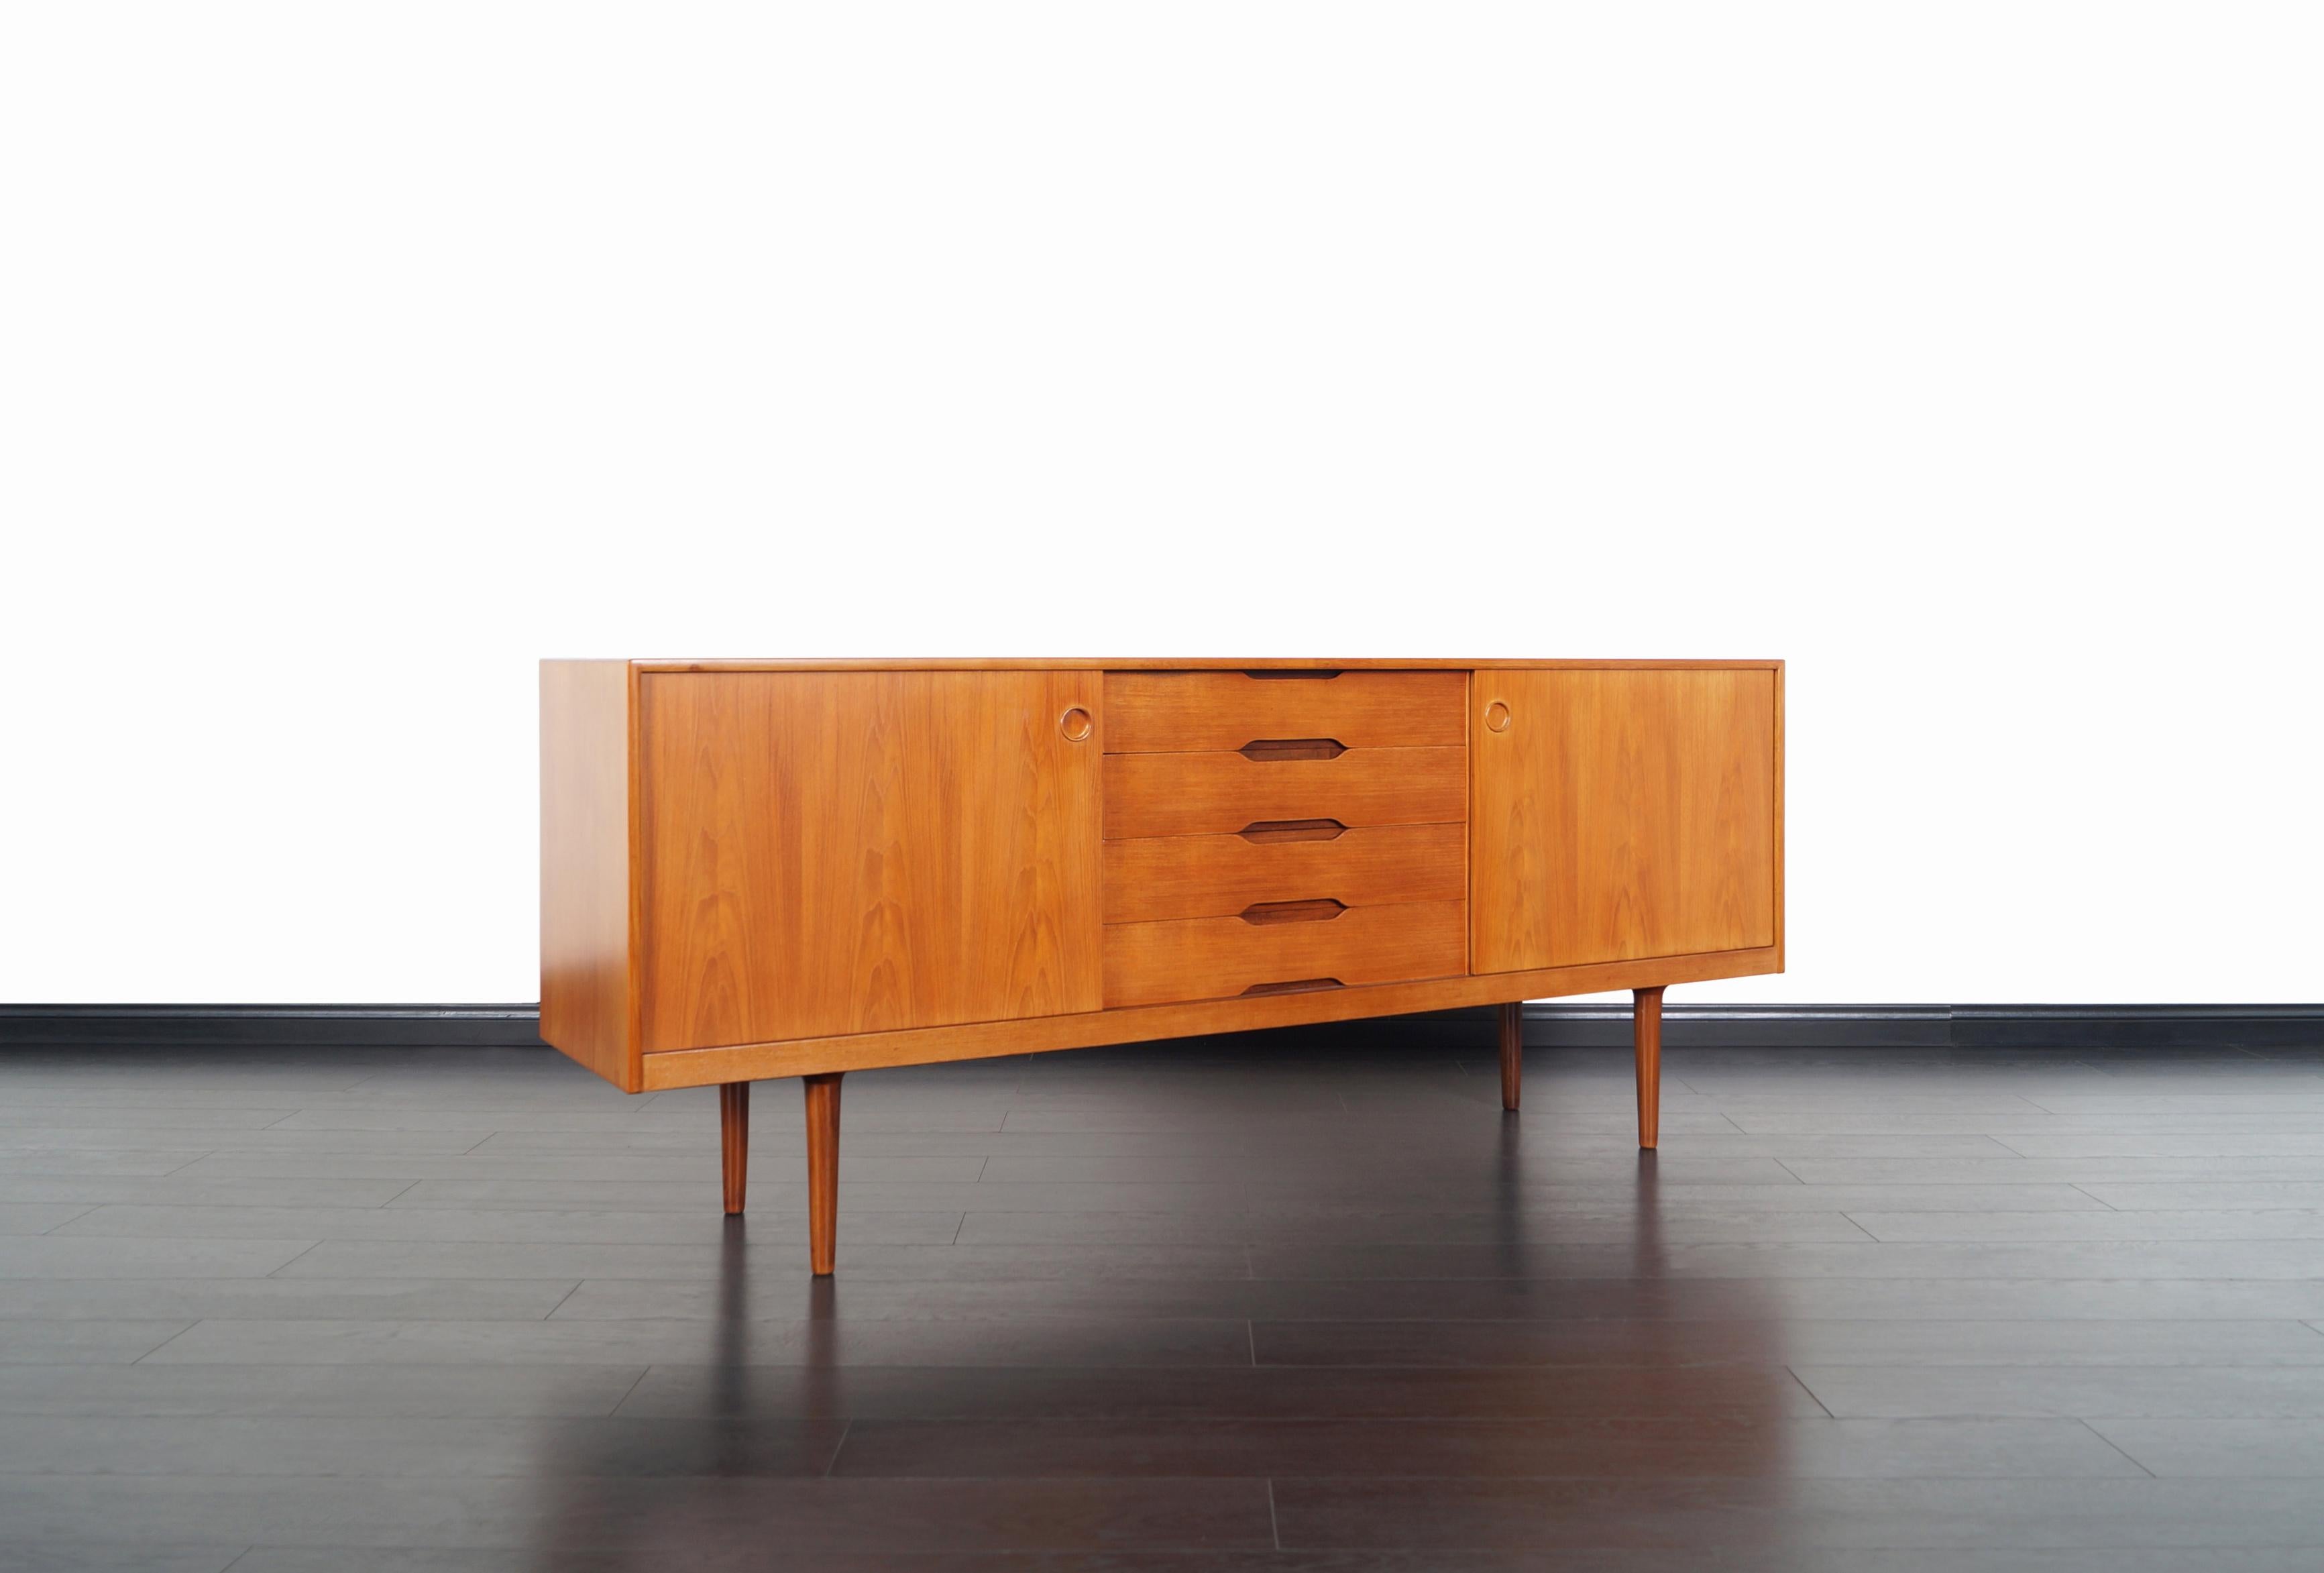 Norwegian modern teak credenza designed by Alf Aarseth for Gustav Bahus in Norway, circa 1960s. This credenza has been skilfully made in teak wood where we can appreciate the fine grains of the wood throughout the entire structure of the furniture.